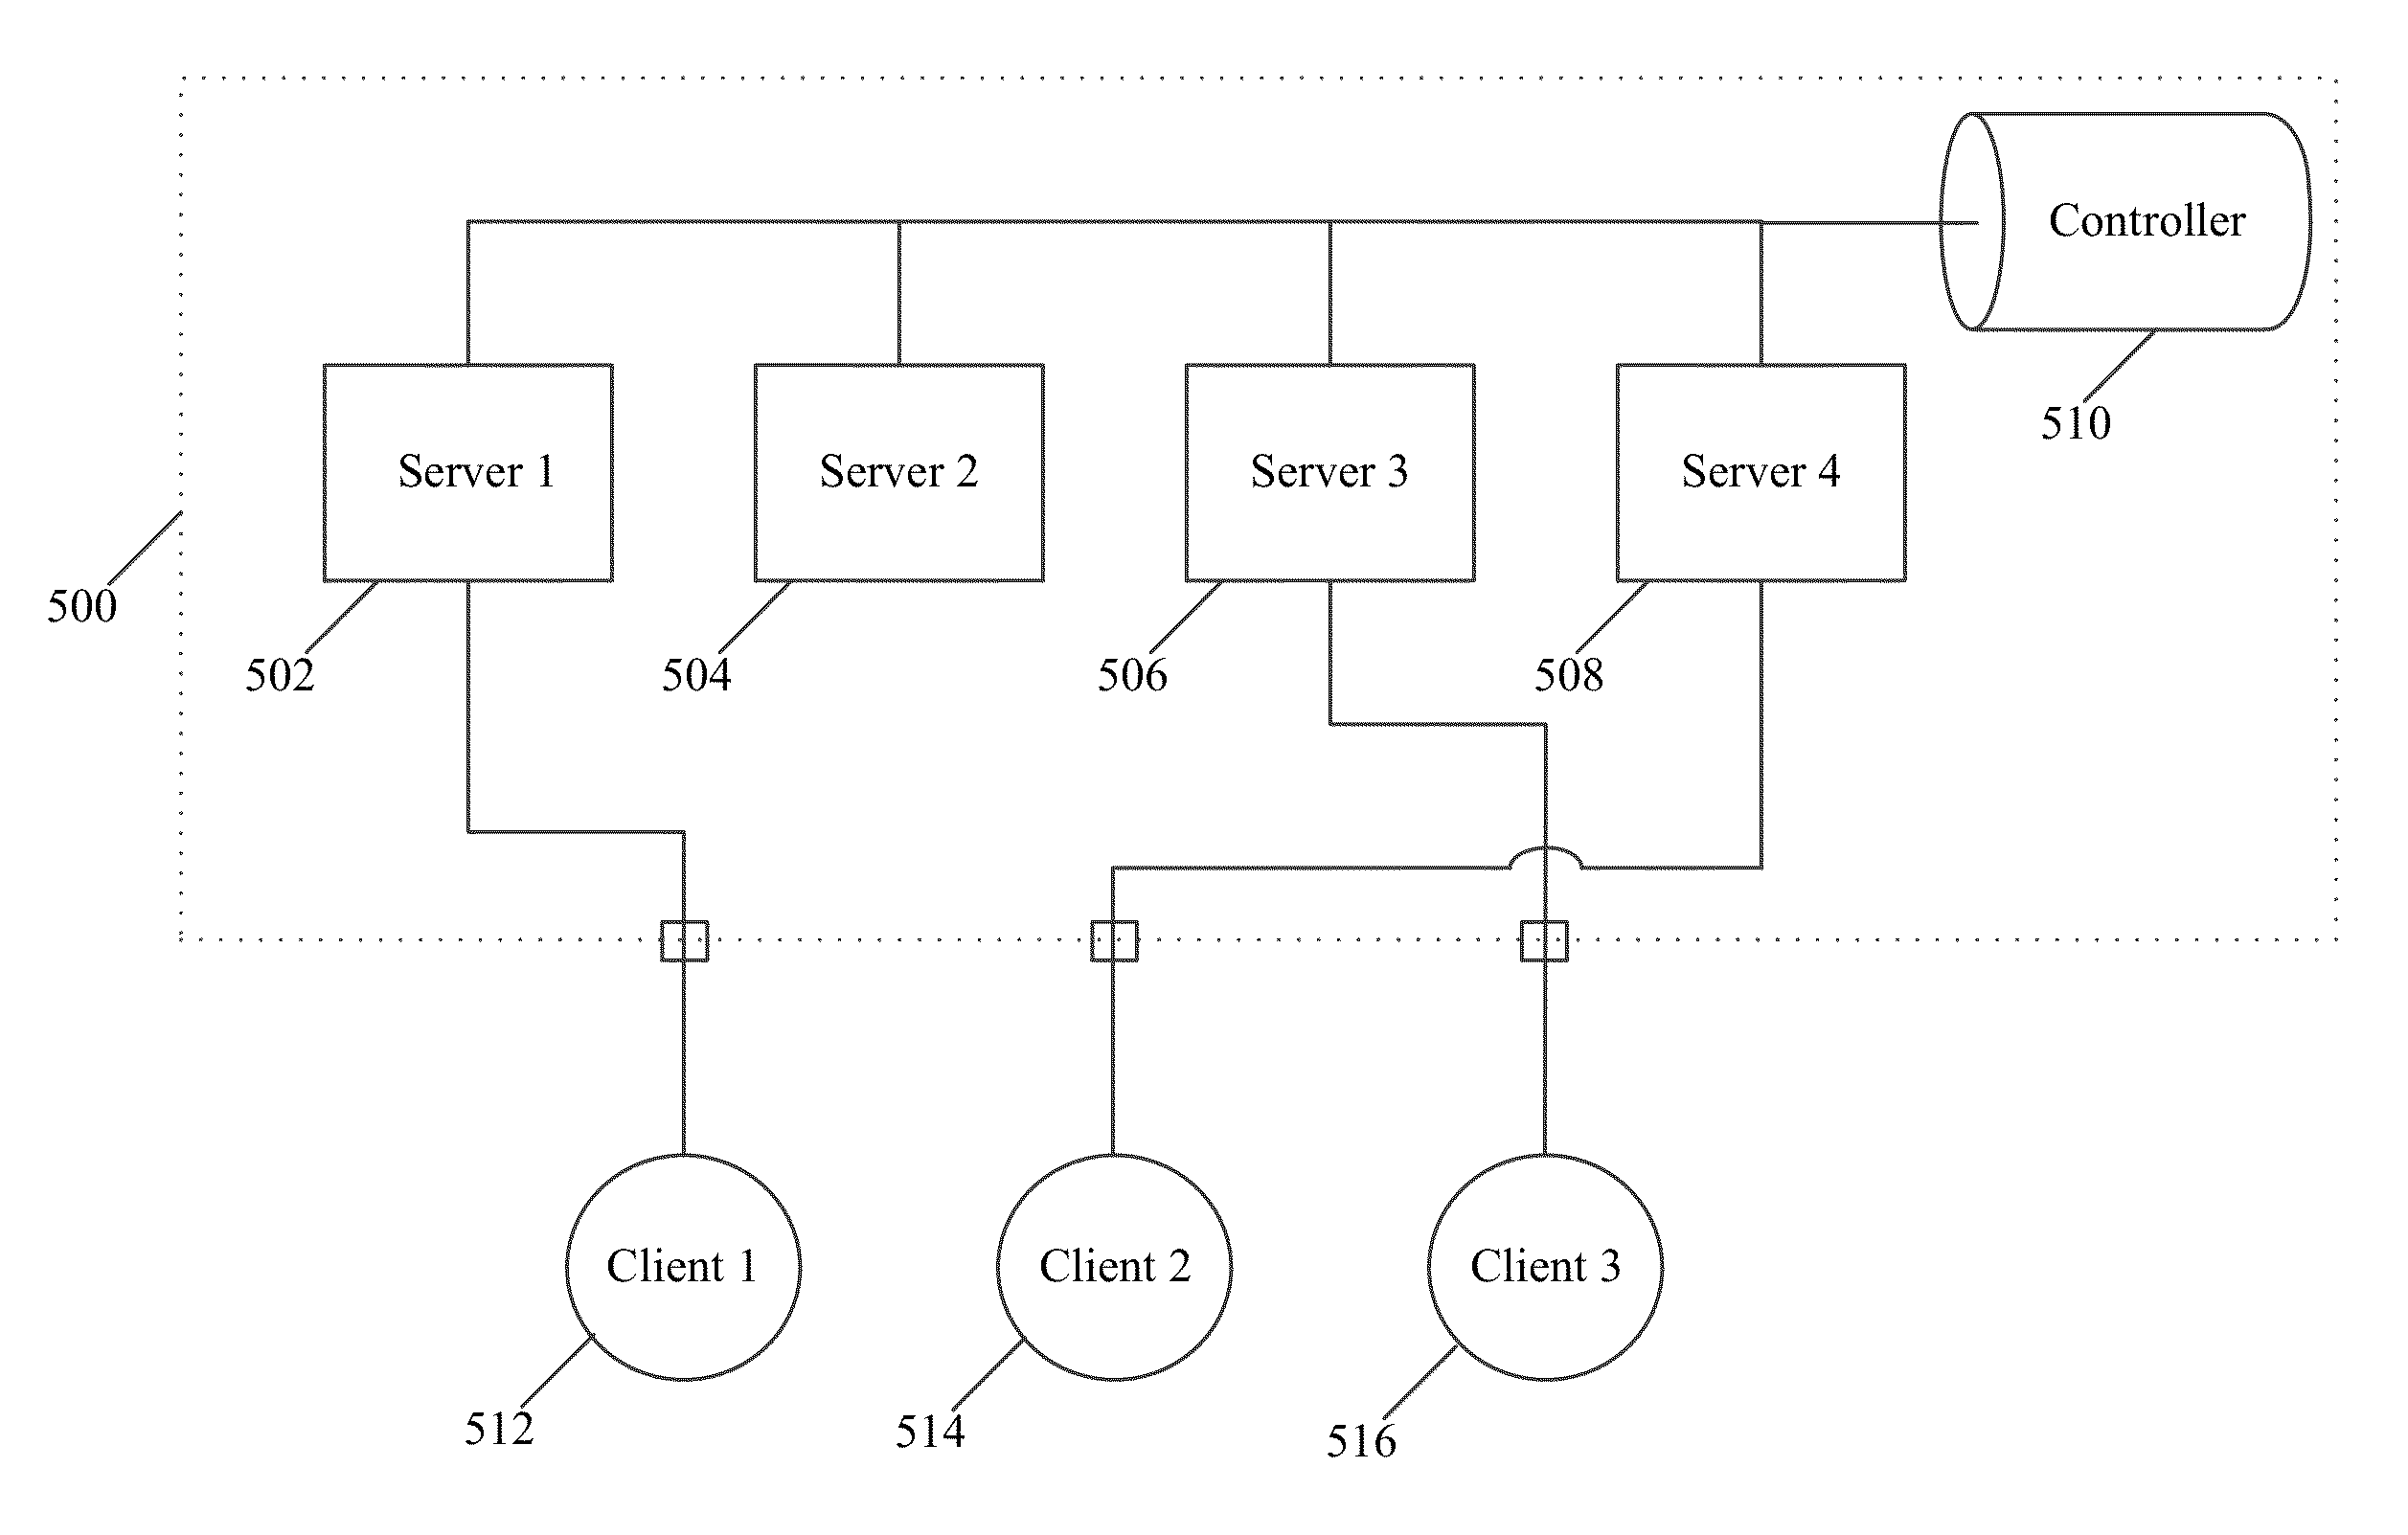 Methods and systems for dynamically specializing and re-purposing computer servers in an elastically scaling cloud computing infrastructure